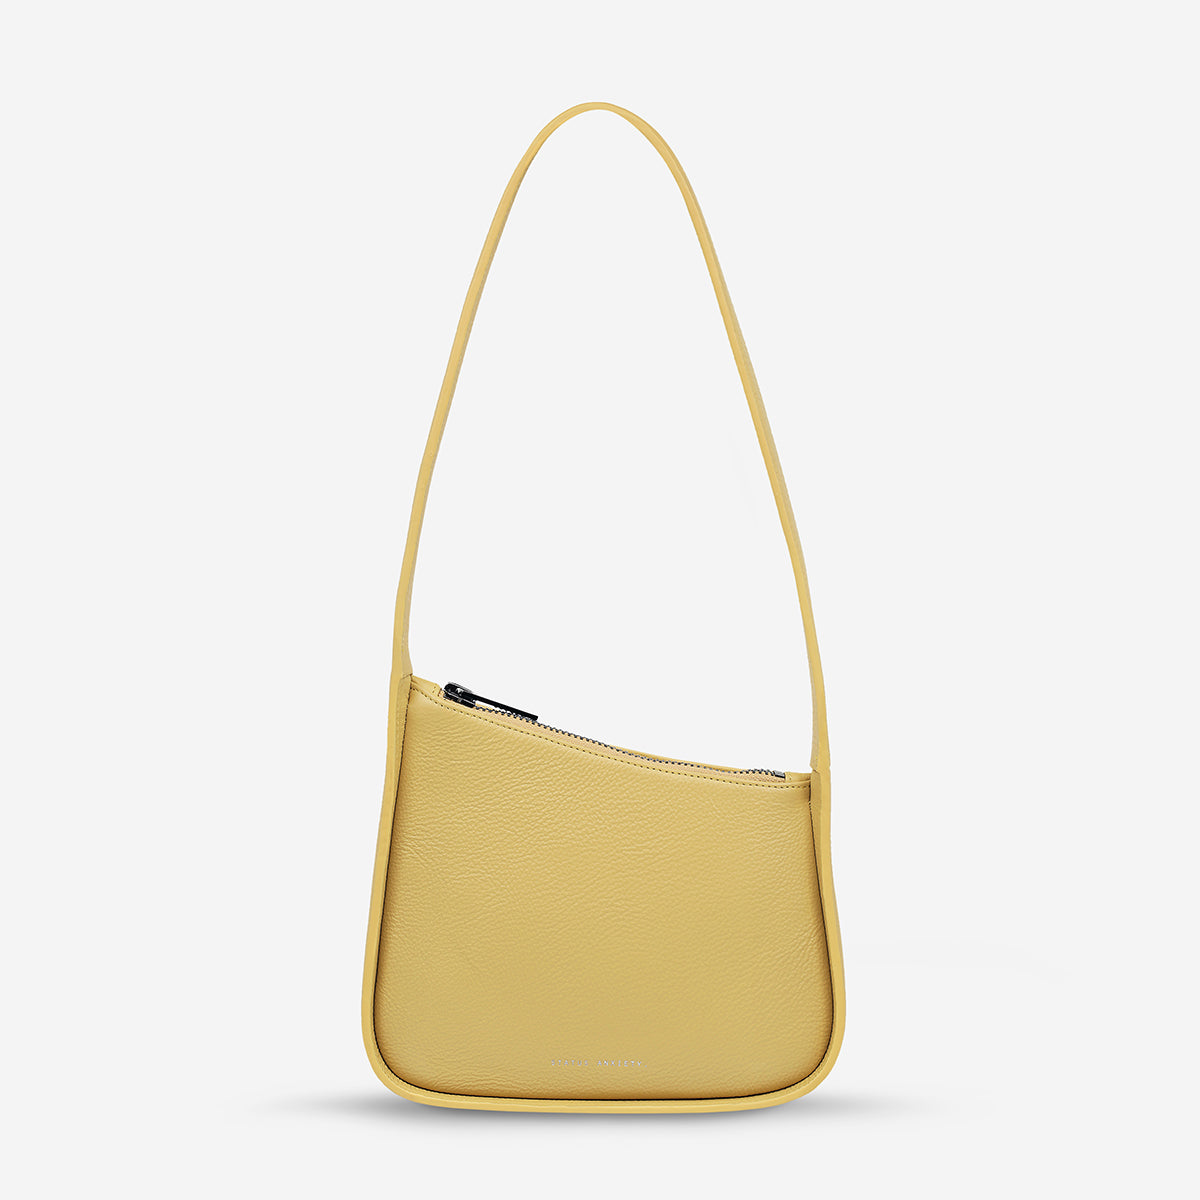 Elegant Leather Tote Bags  Buy Online at Status Anxiety®